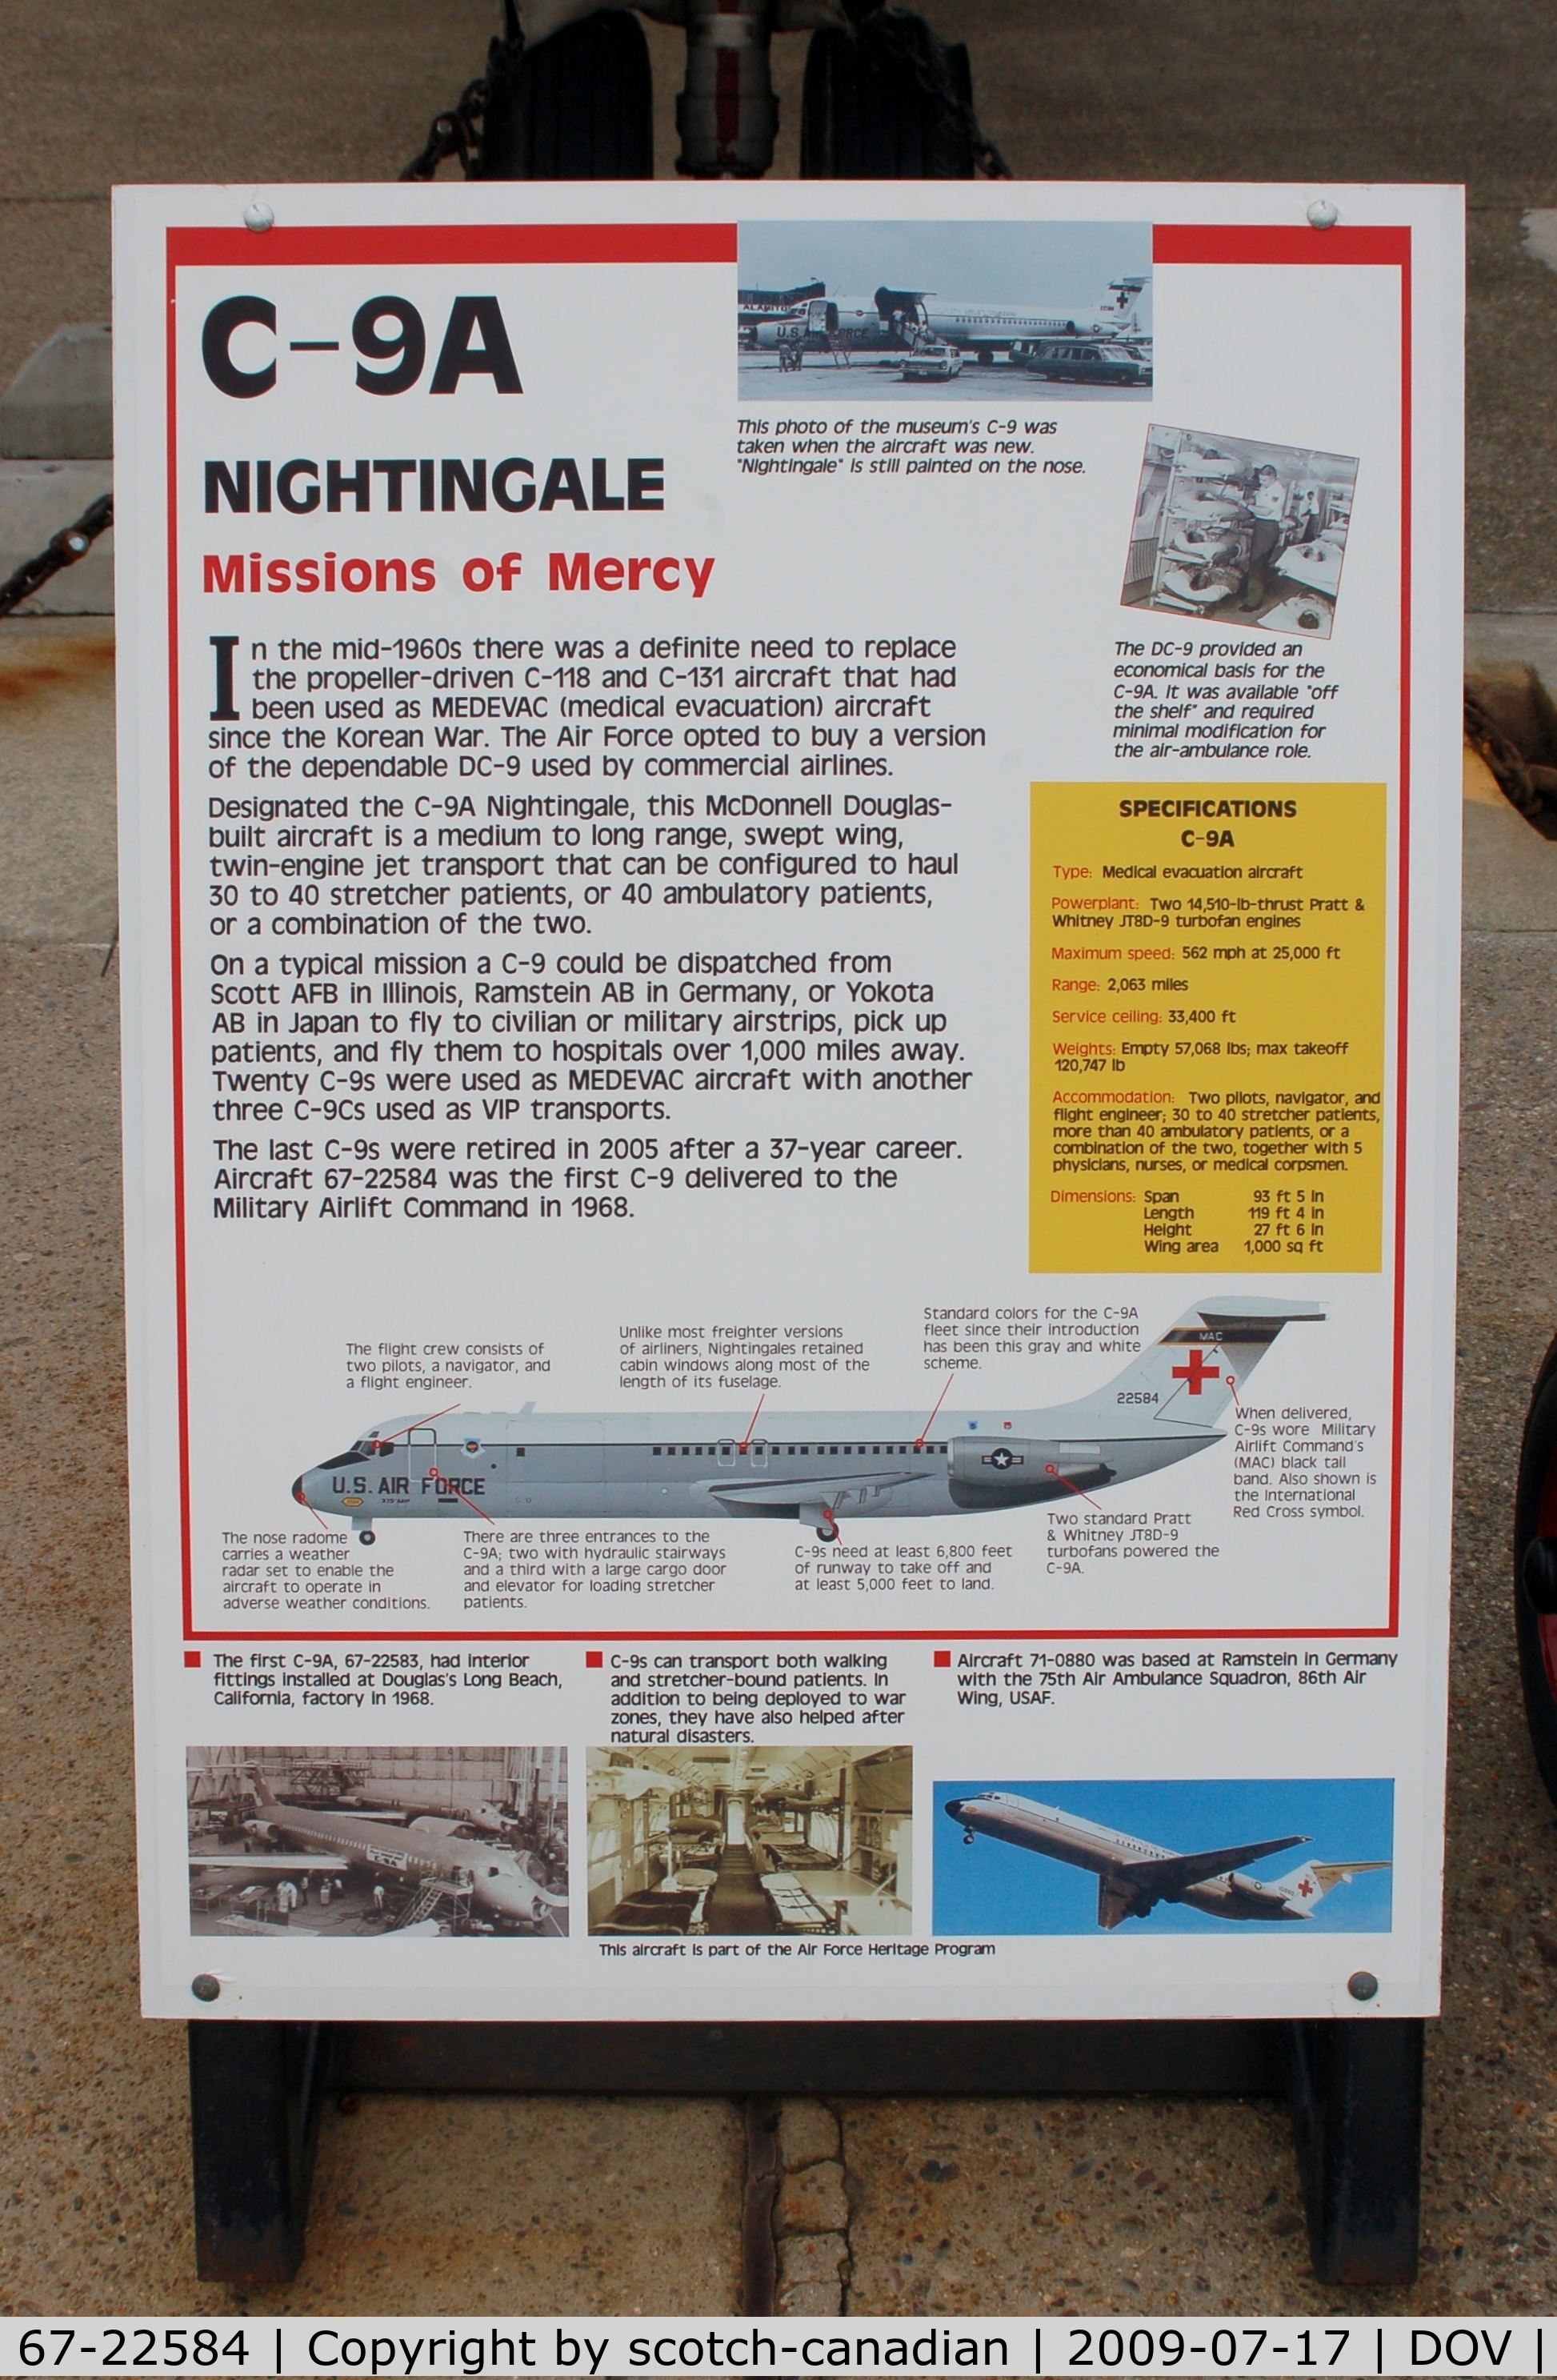 67-22584, 1967 McDonnell Douglas C-9A Nightingale C/N 47242, Information Plaque for the 1967 McDonnell Douglas C-9A Nightingale at the Air Mobility Command Museum, Dover AFB, DE